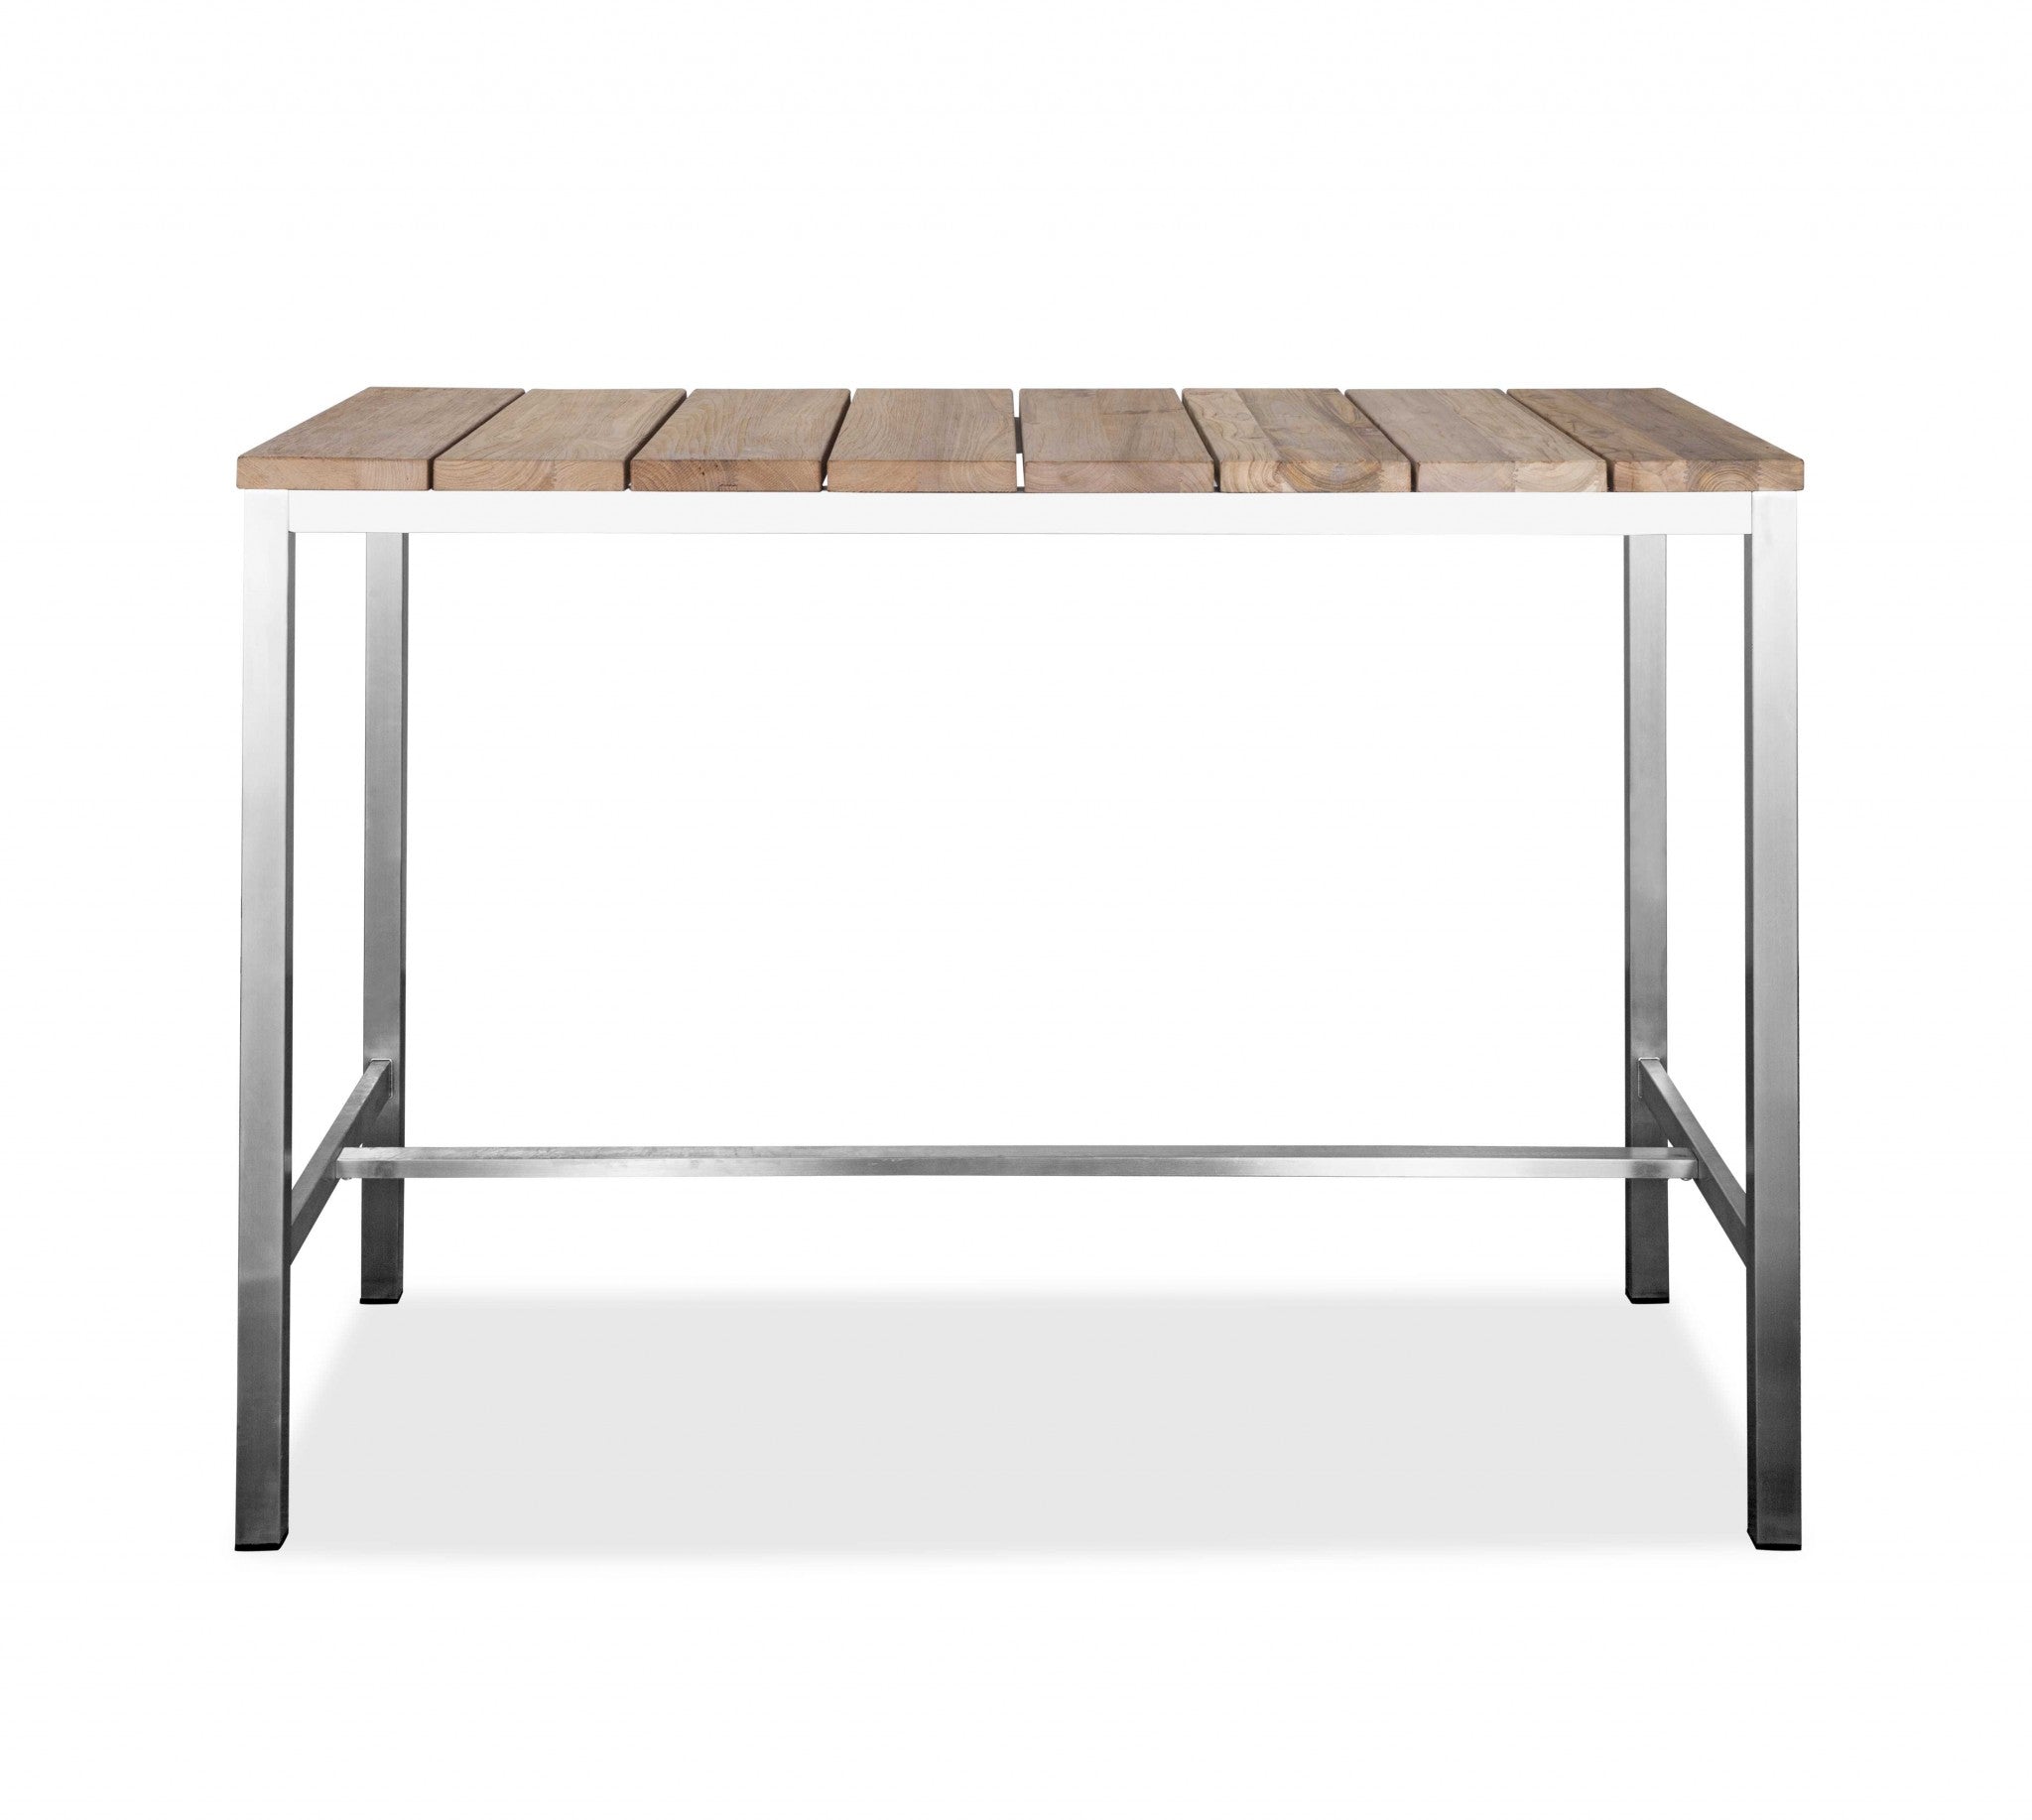 55" Wood Brown and Silver Solid Wood and Stainless Steel Dining Table